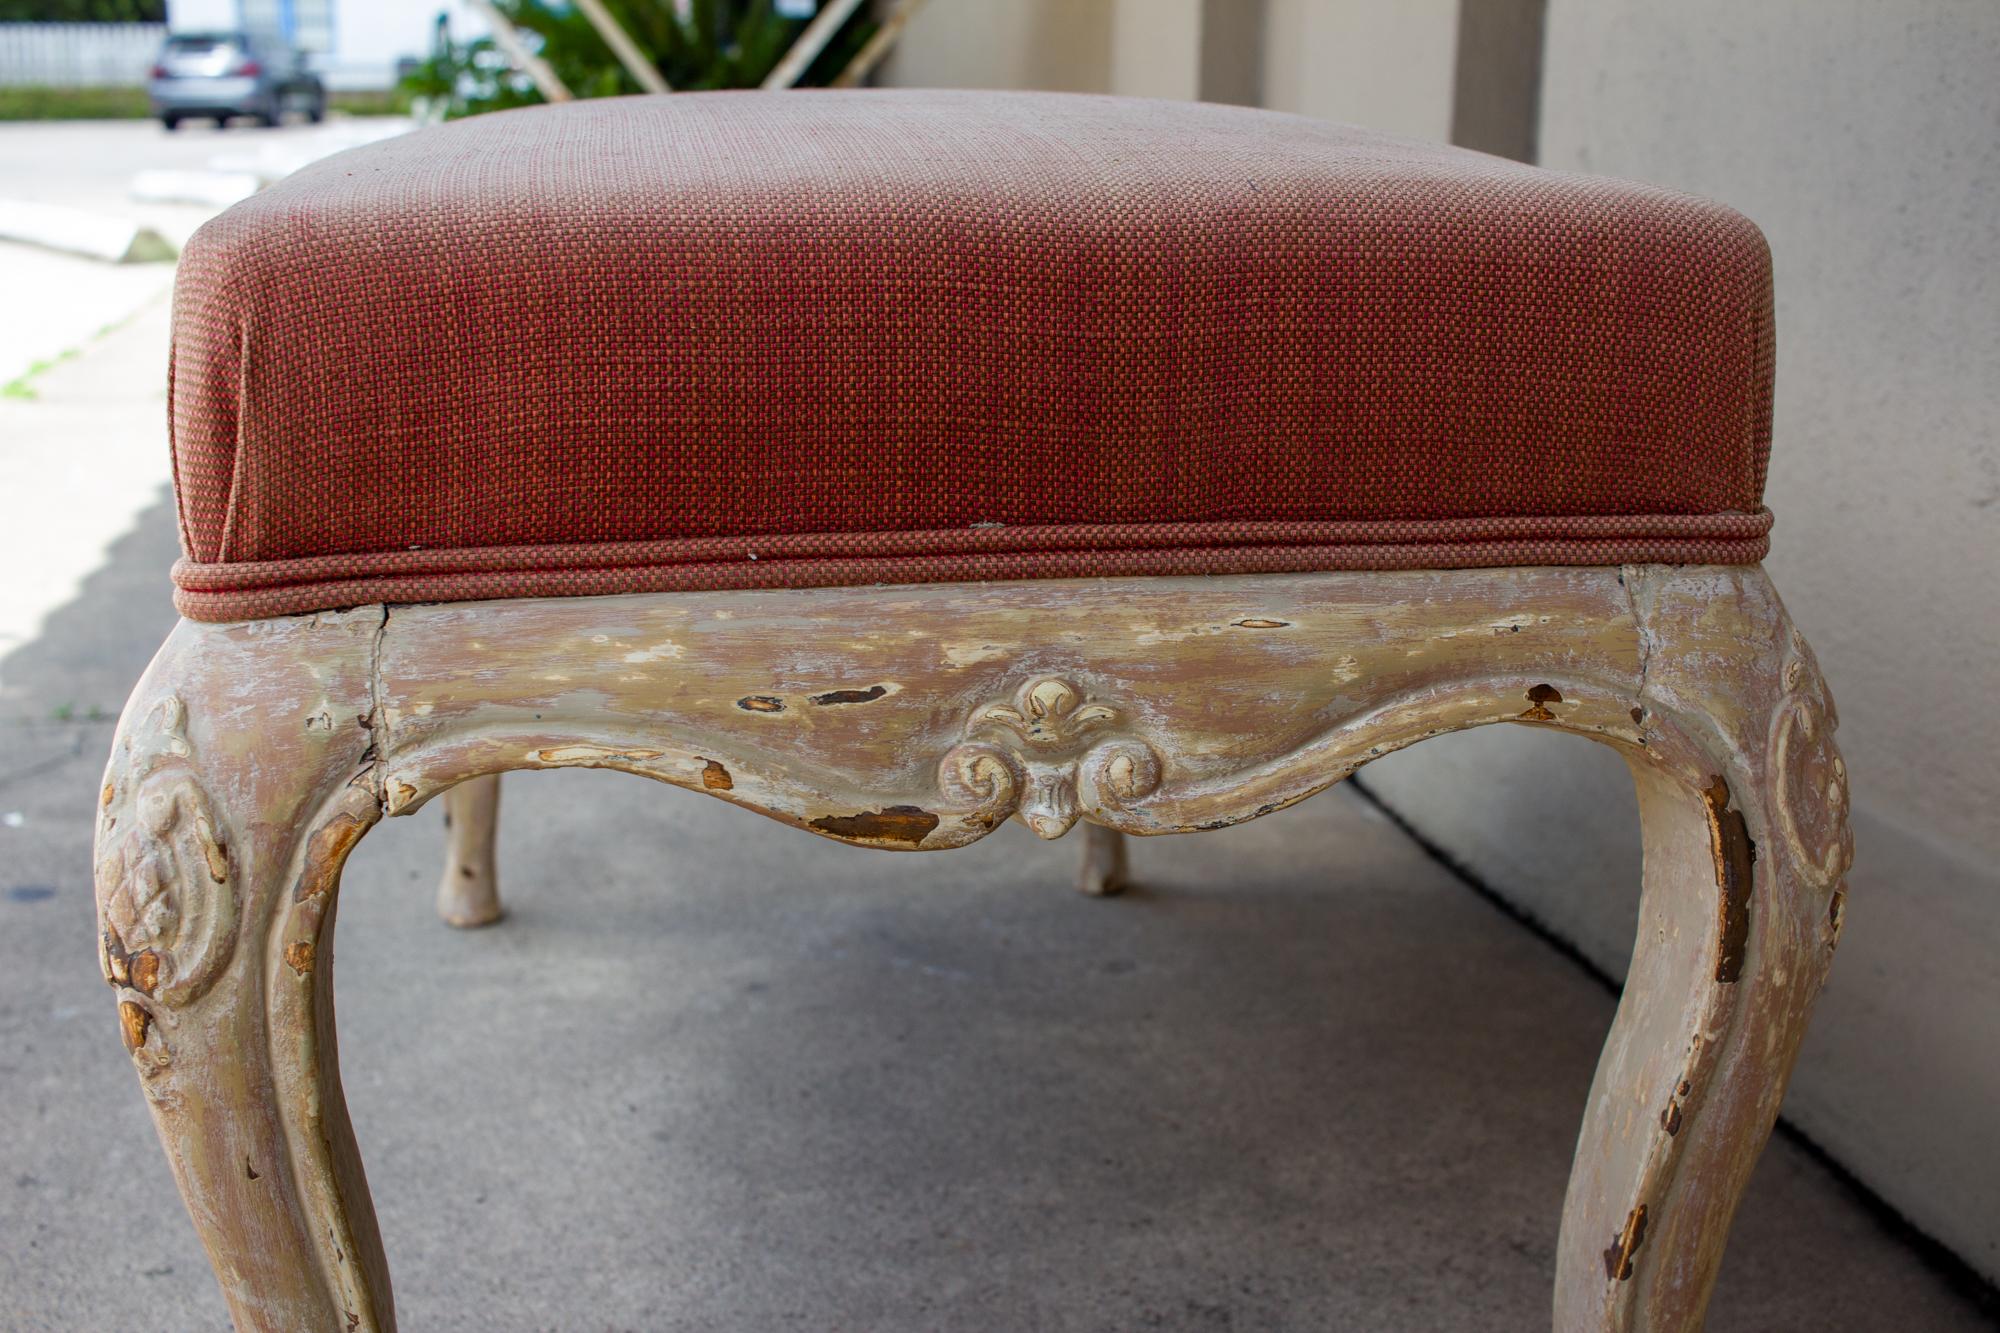 Early 19th Century Antique French Carved Bench with Distressed Painted Finish, circa 1820